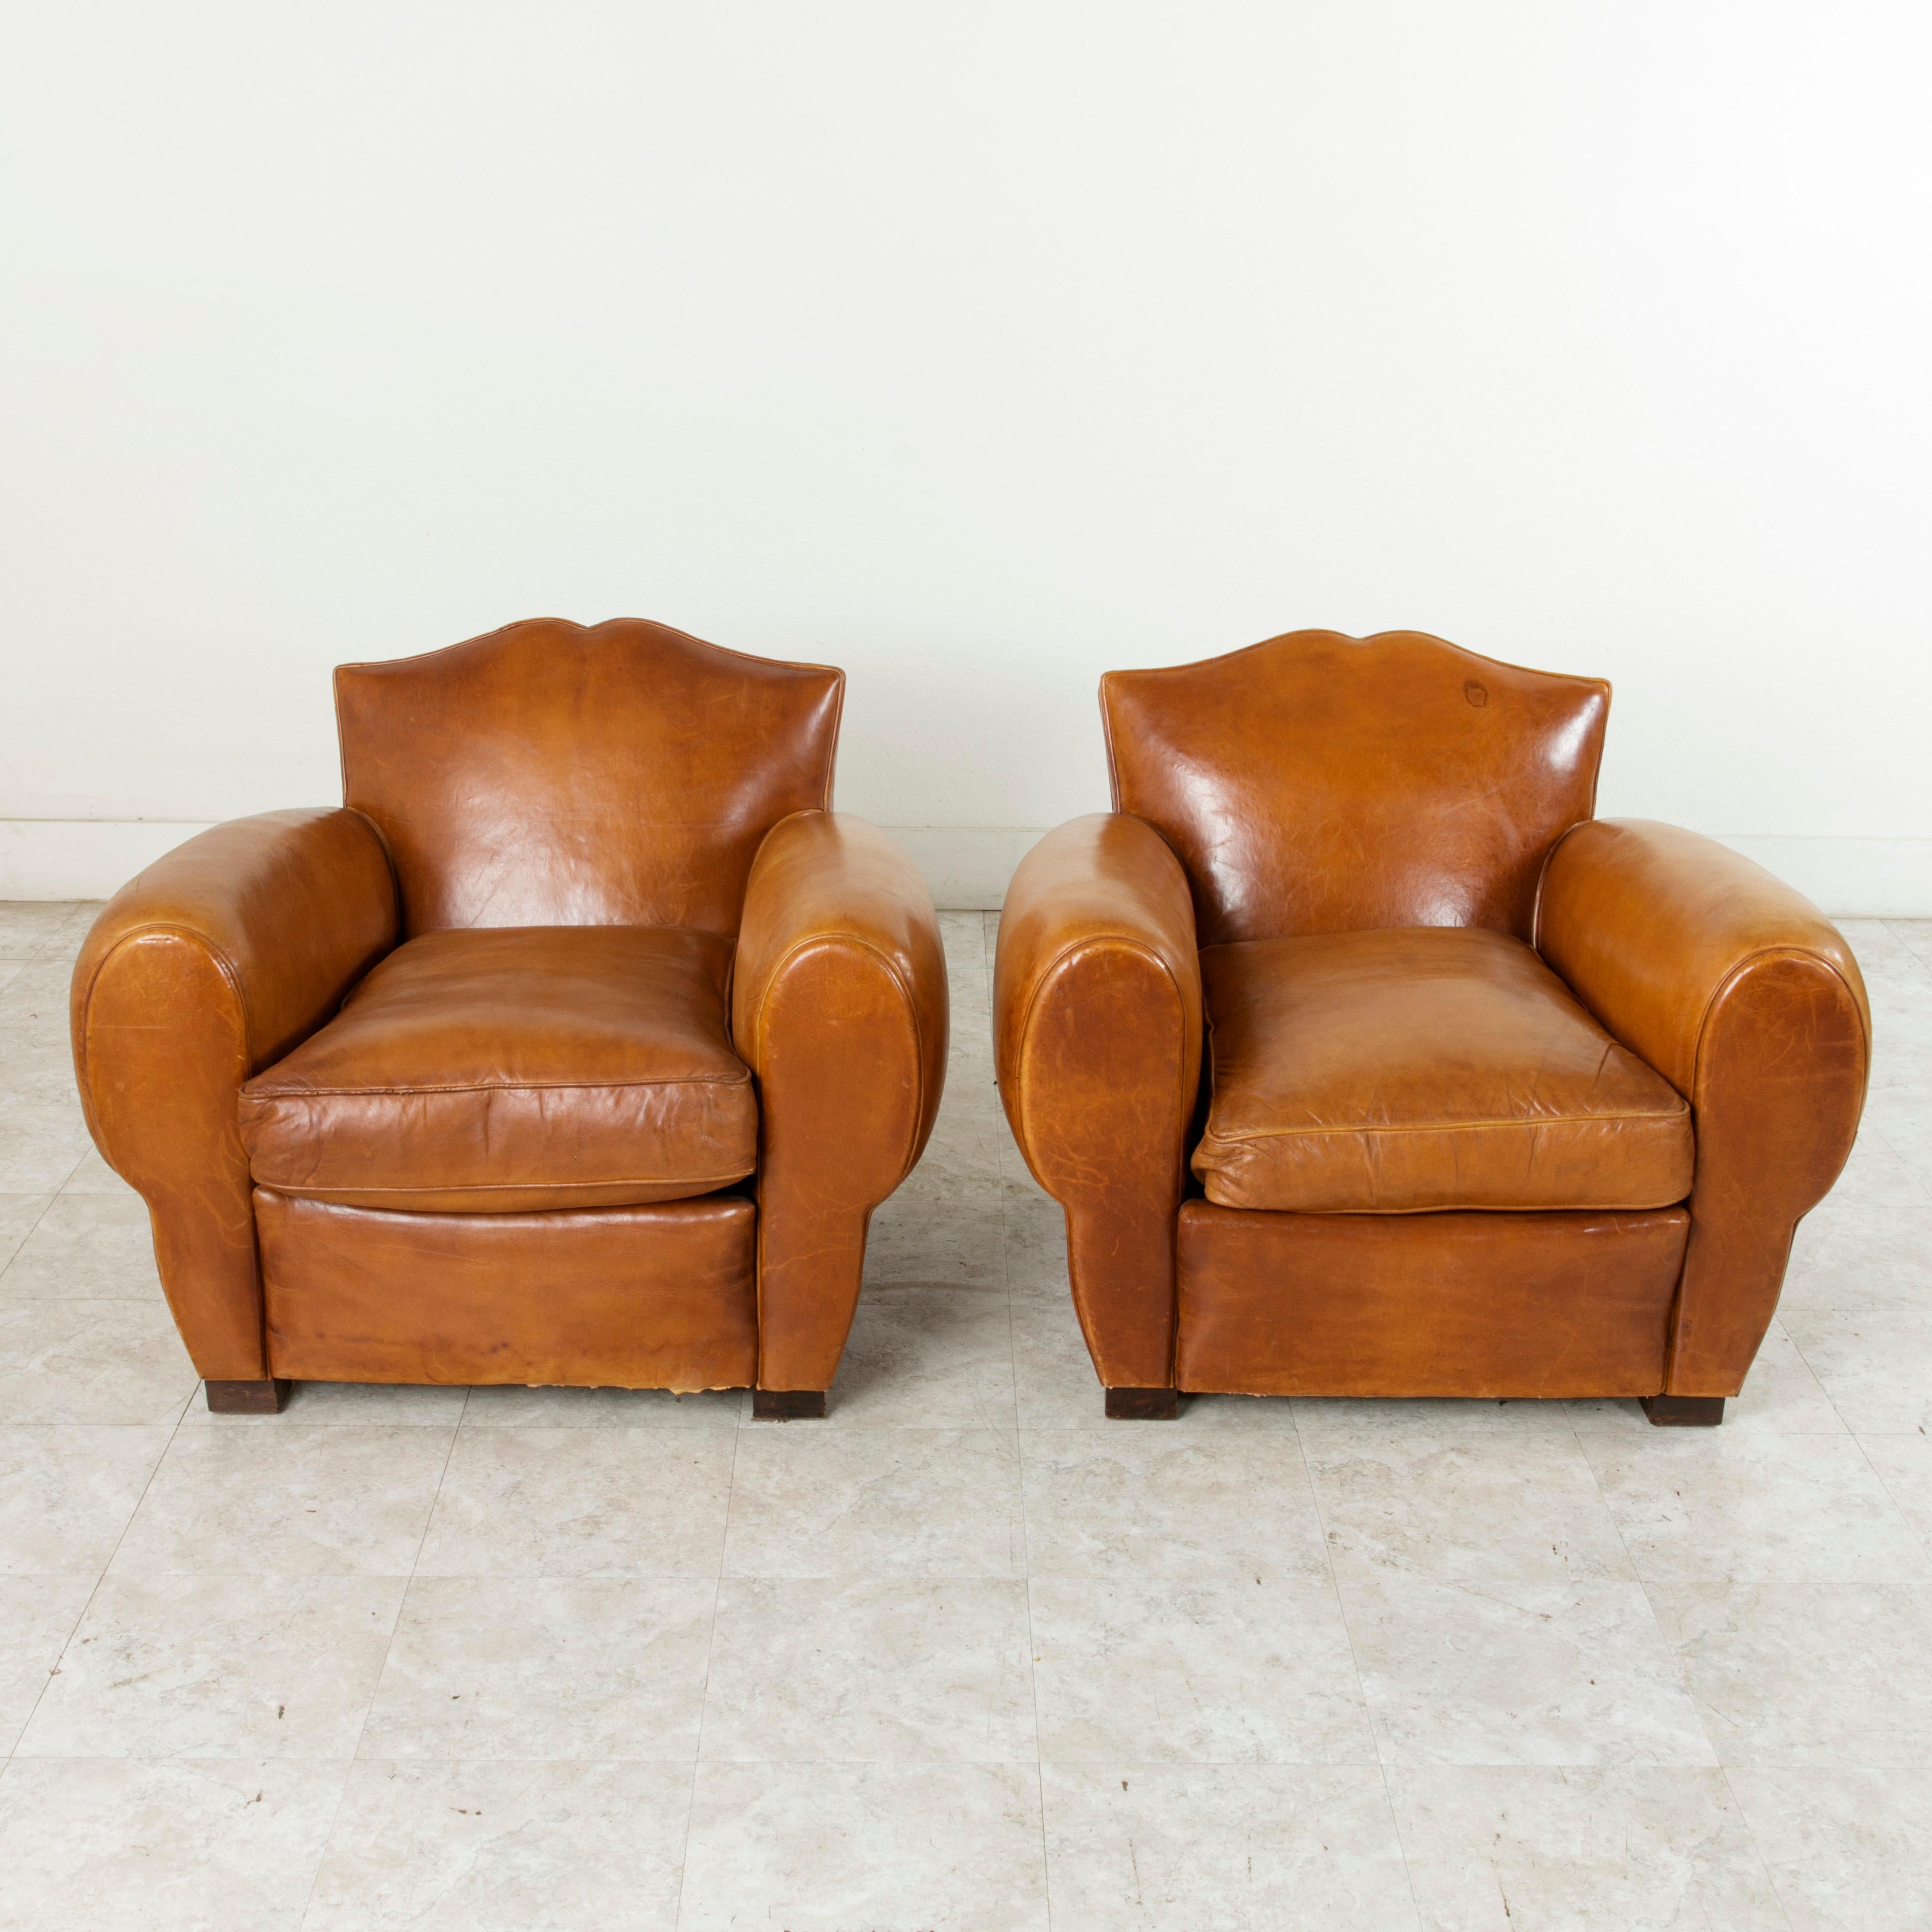 This pair of mid-20th century French Art Deco period moustache back club chairs are in wonderful condition. Originally in the entryway of an elderly couple's home in France, these chairs have rarely been sat in. With a design created during the Art